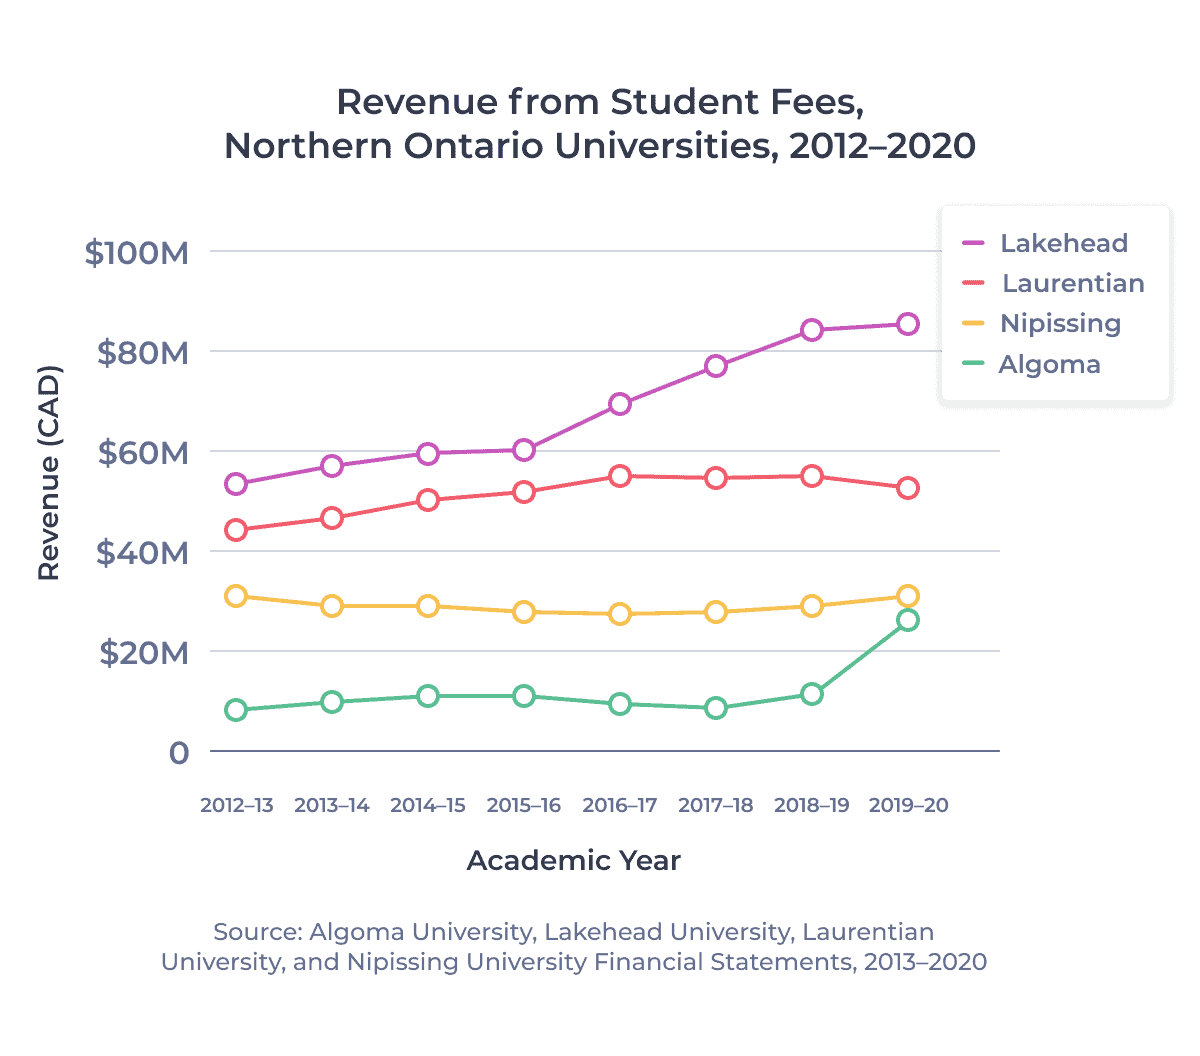 Line chart showing revenue reported from student fees for Northern Ontario universities between 2012-13 and 2019-20. Examined in detail below.